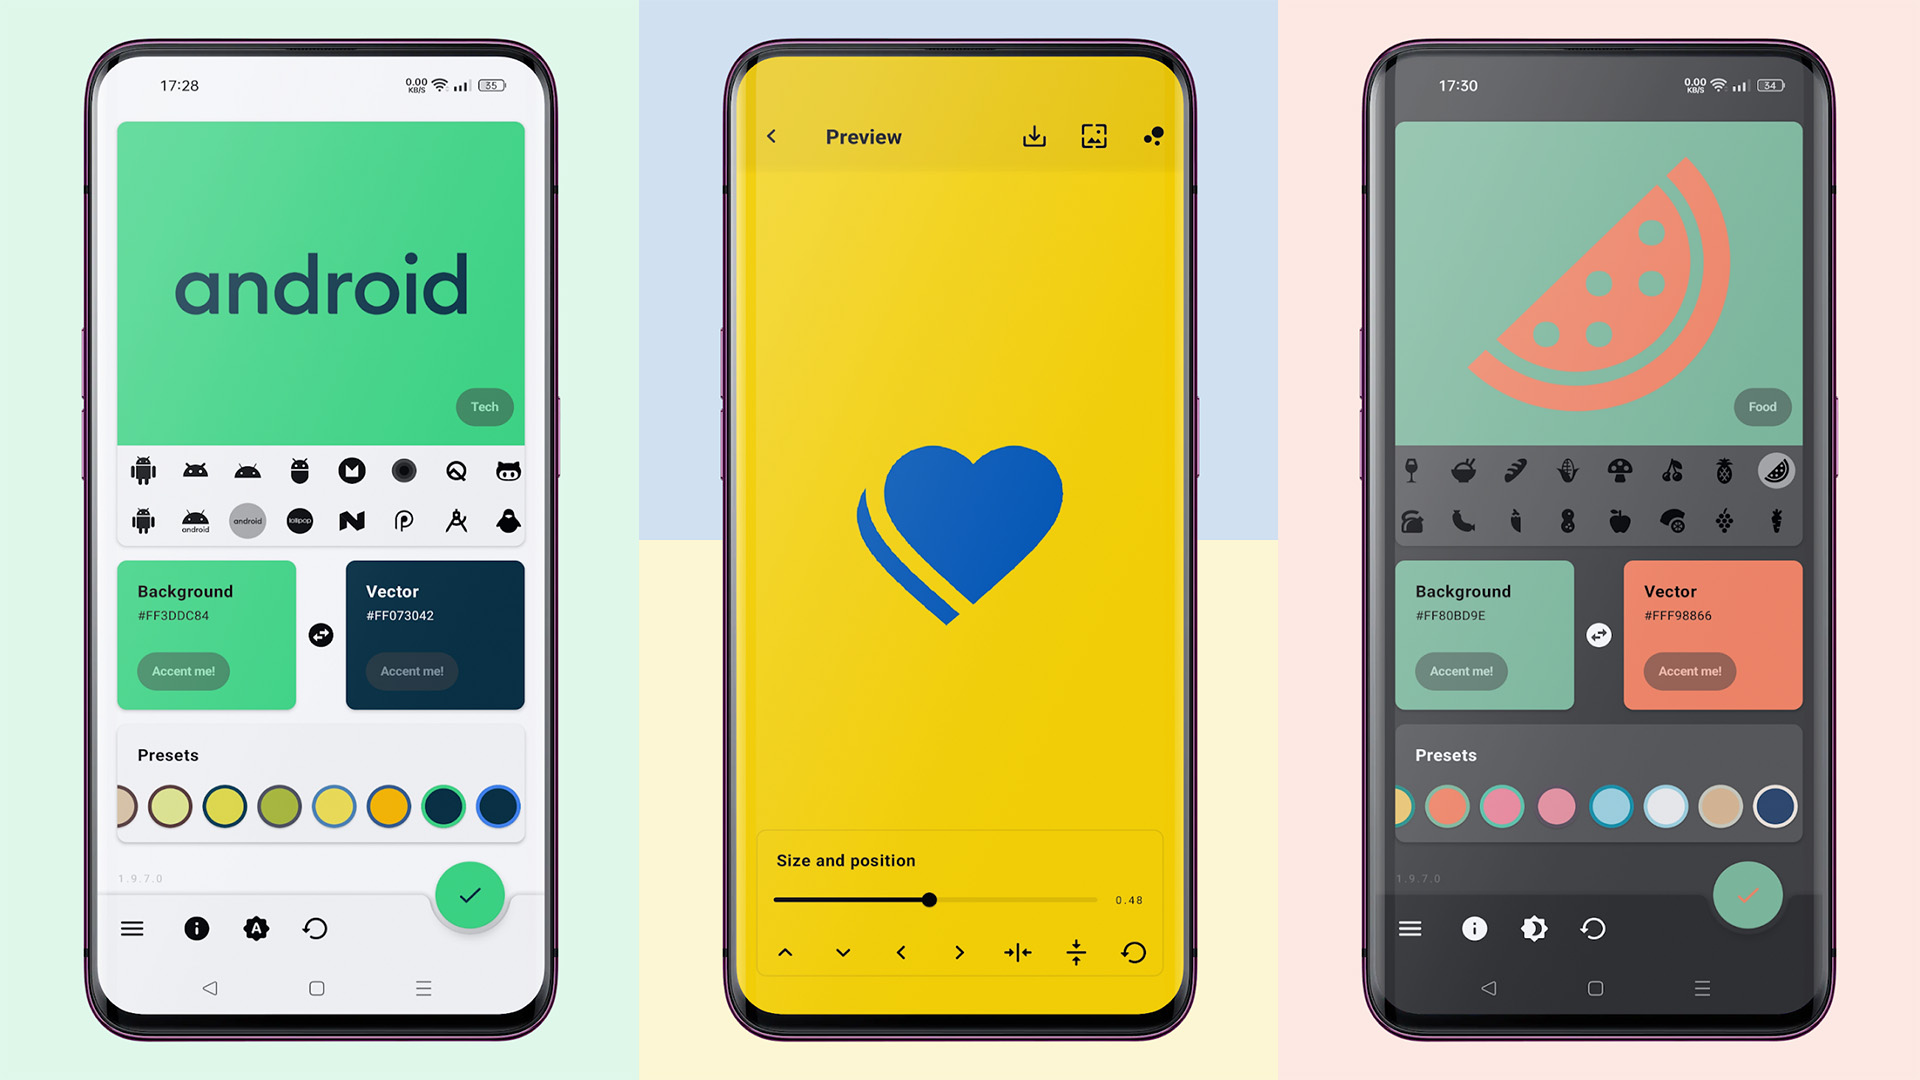 10 Best Wallpaper Apps For iPhone To Customize Your Device In 2019